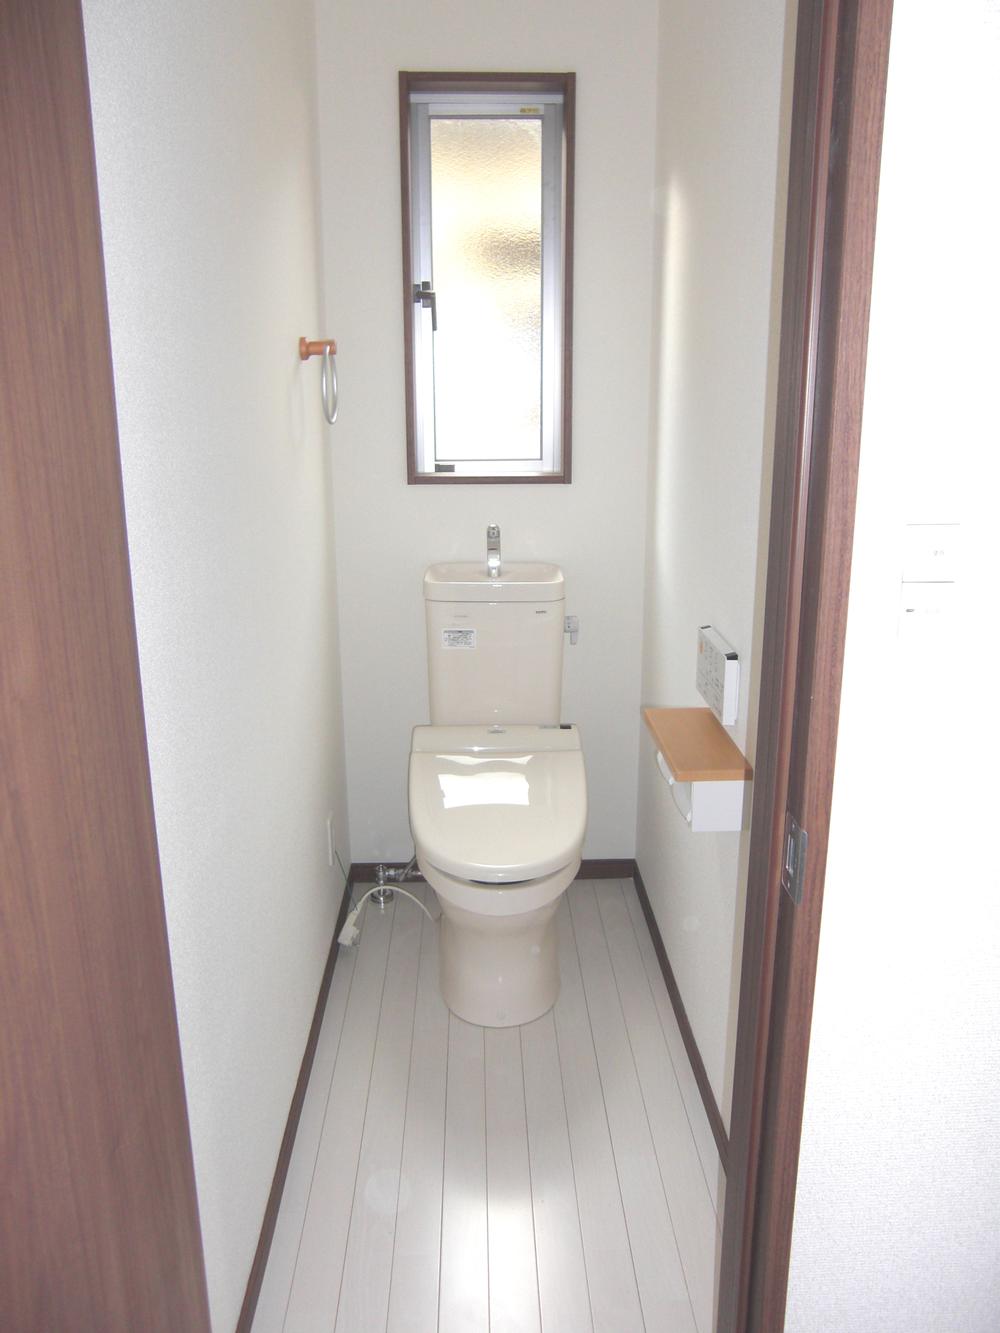 Toilet. Both 1.2-floor bidet correspondence! The first floor is using the air wash cloth with a deodorizing effect! (Same specifications)